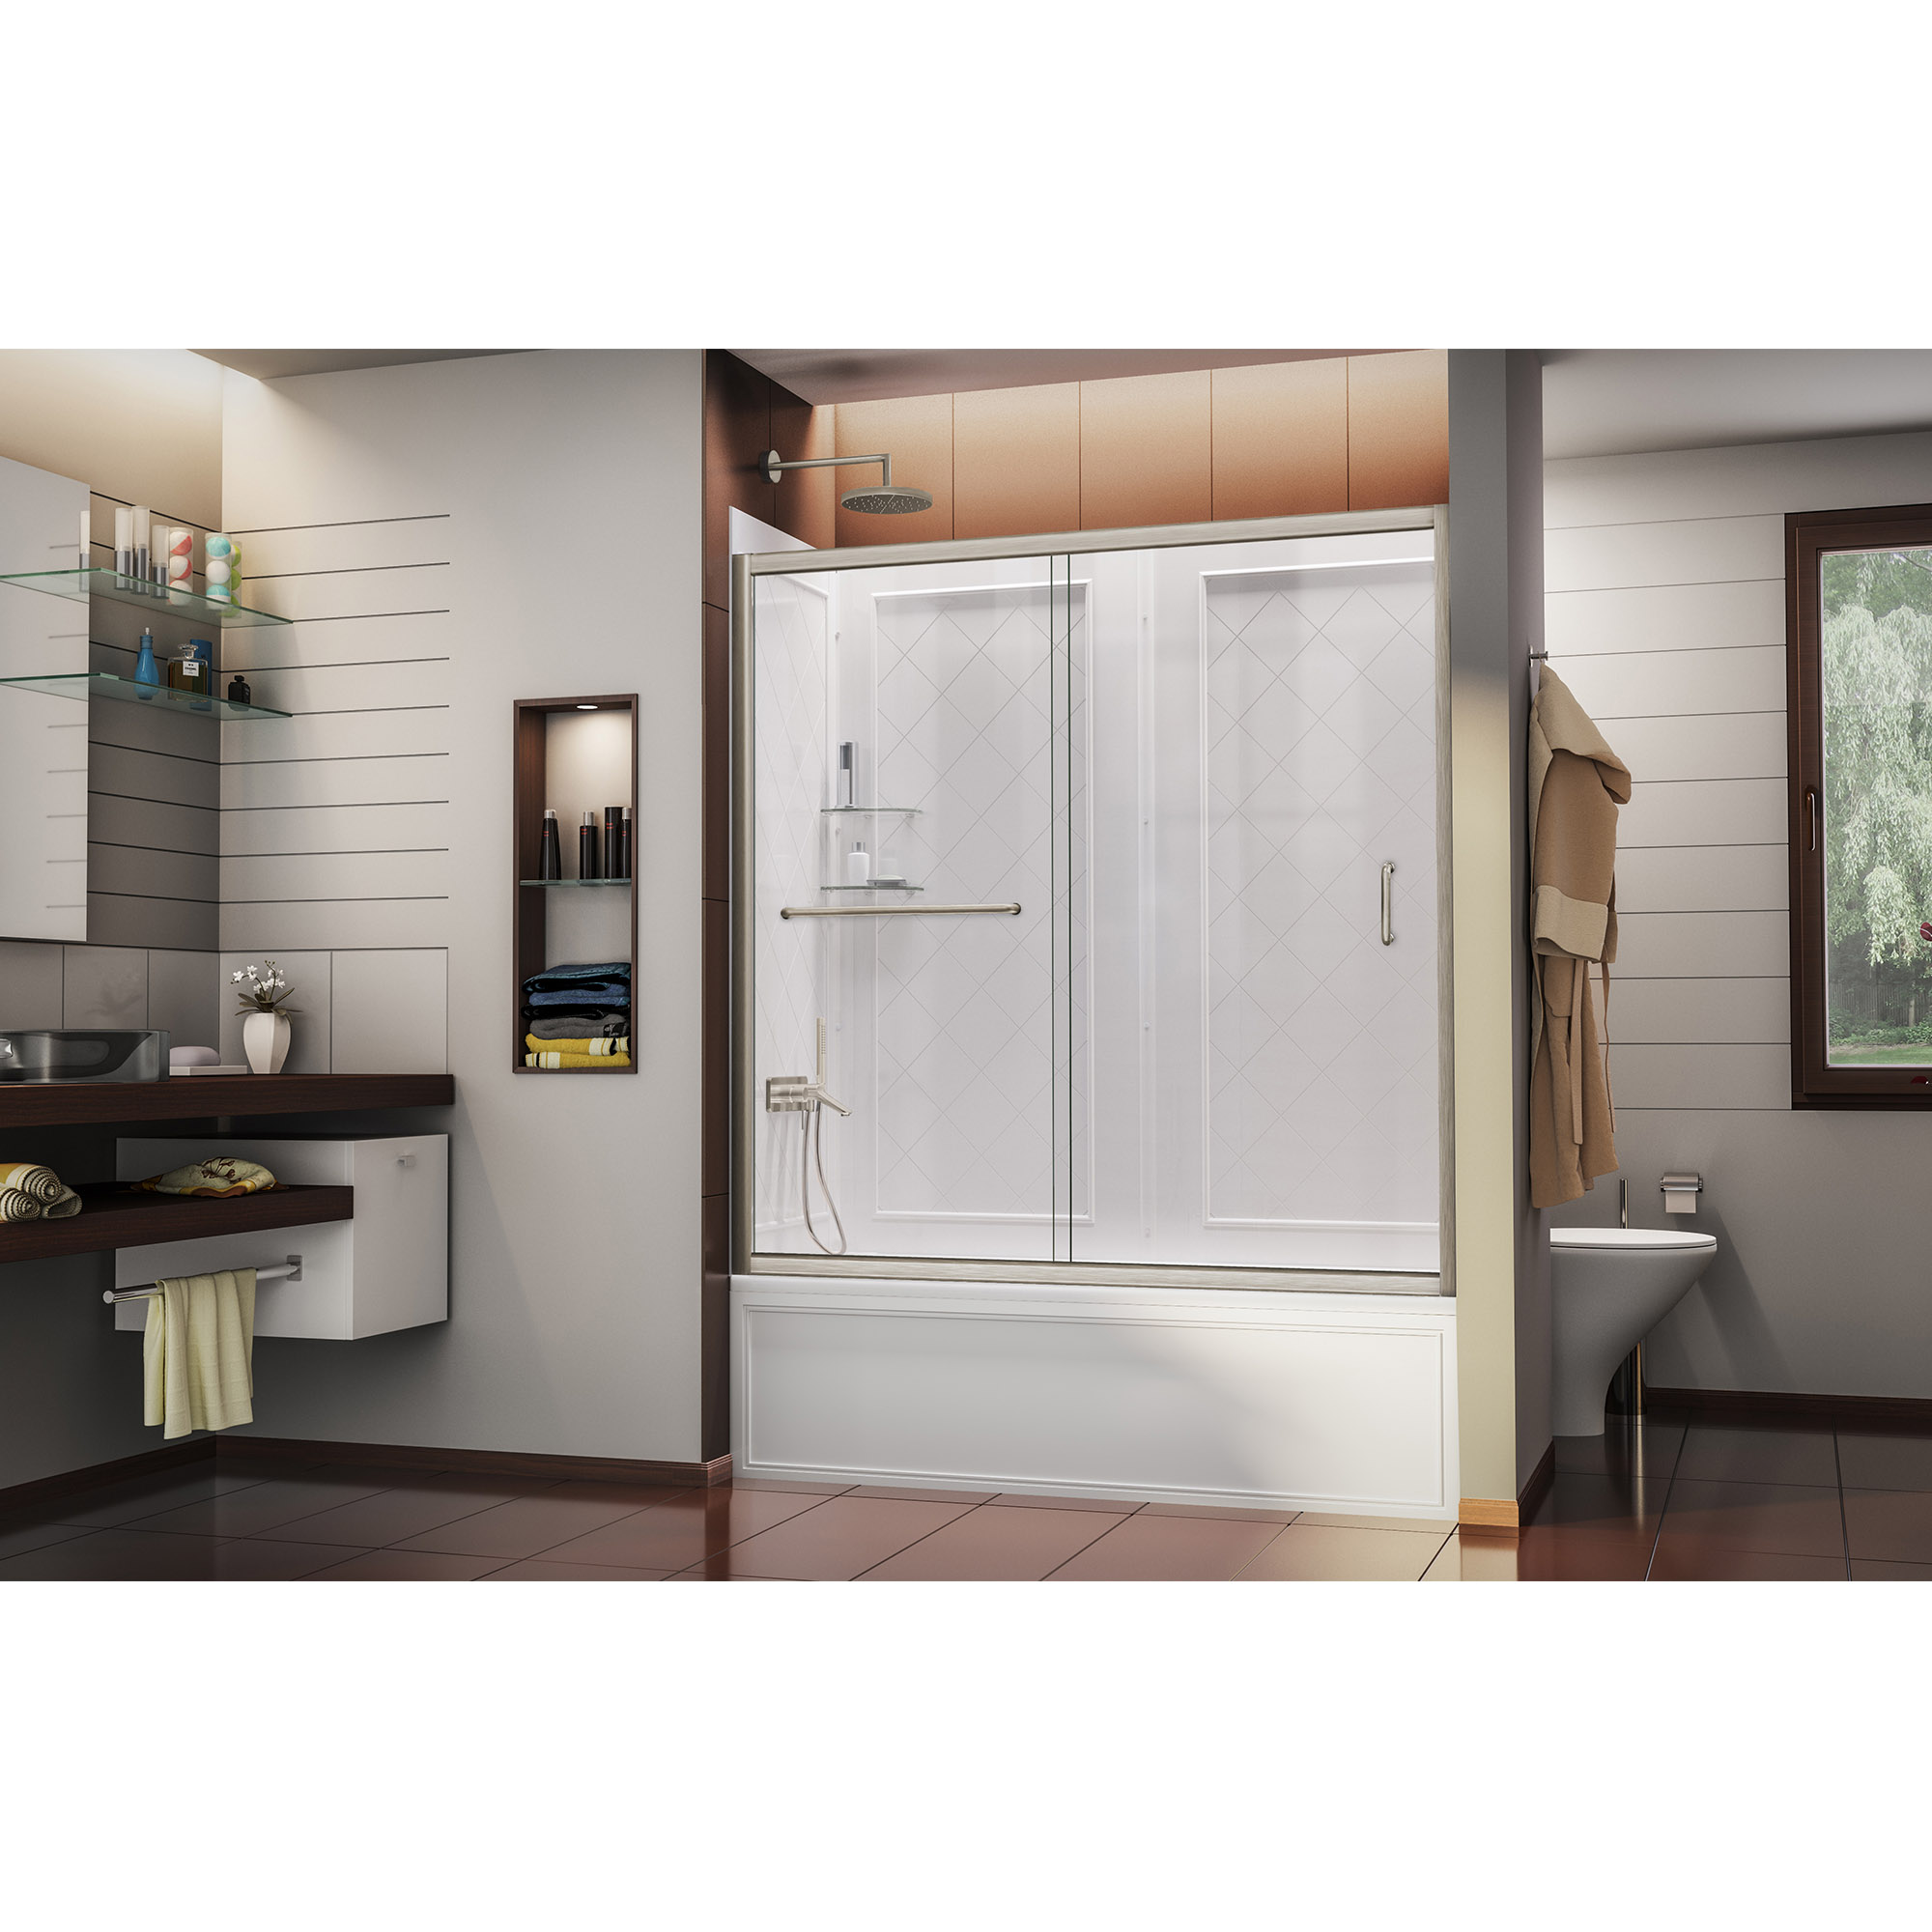 DreamLine Infinity-Z 56-60 in. W x 60 in. H Clear Sliding Tub Door in Brushed Nickel with White Acrylic Backwall Kit - image 4 of 14